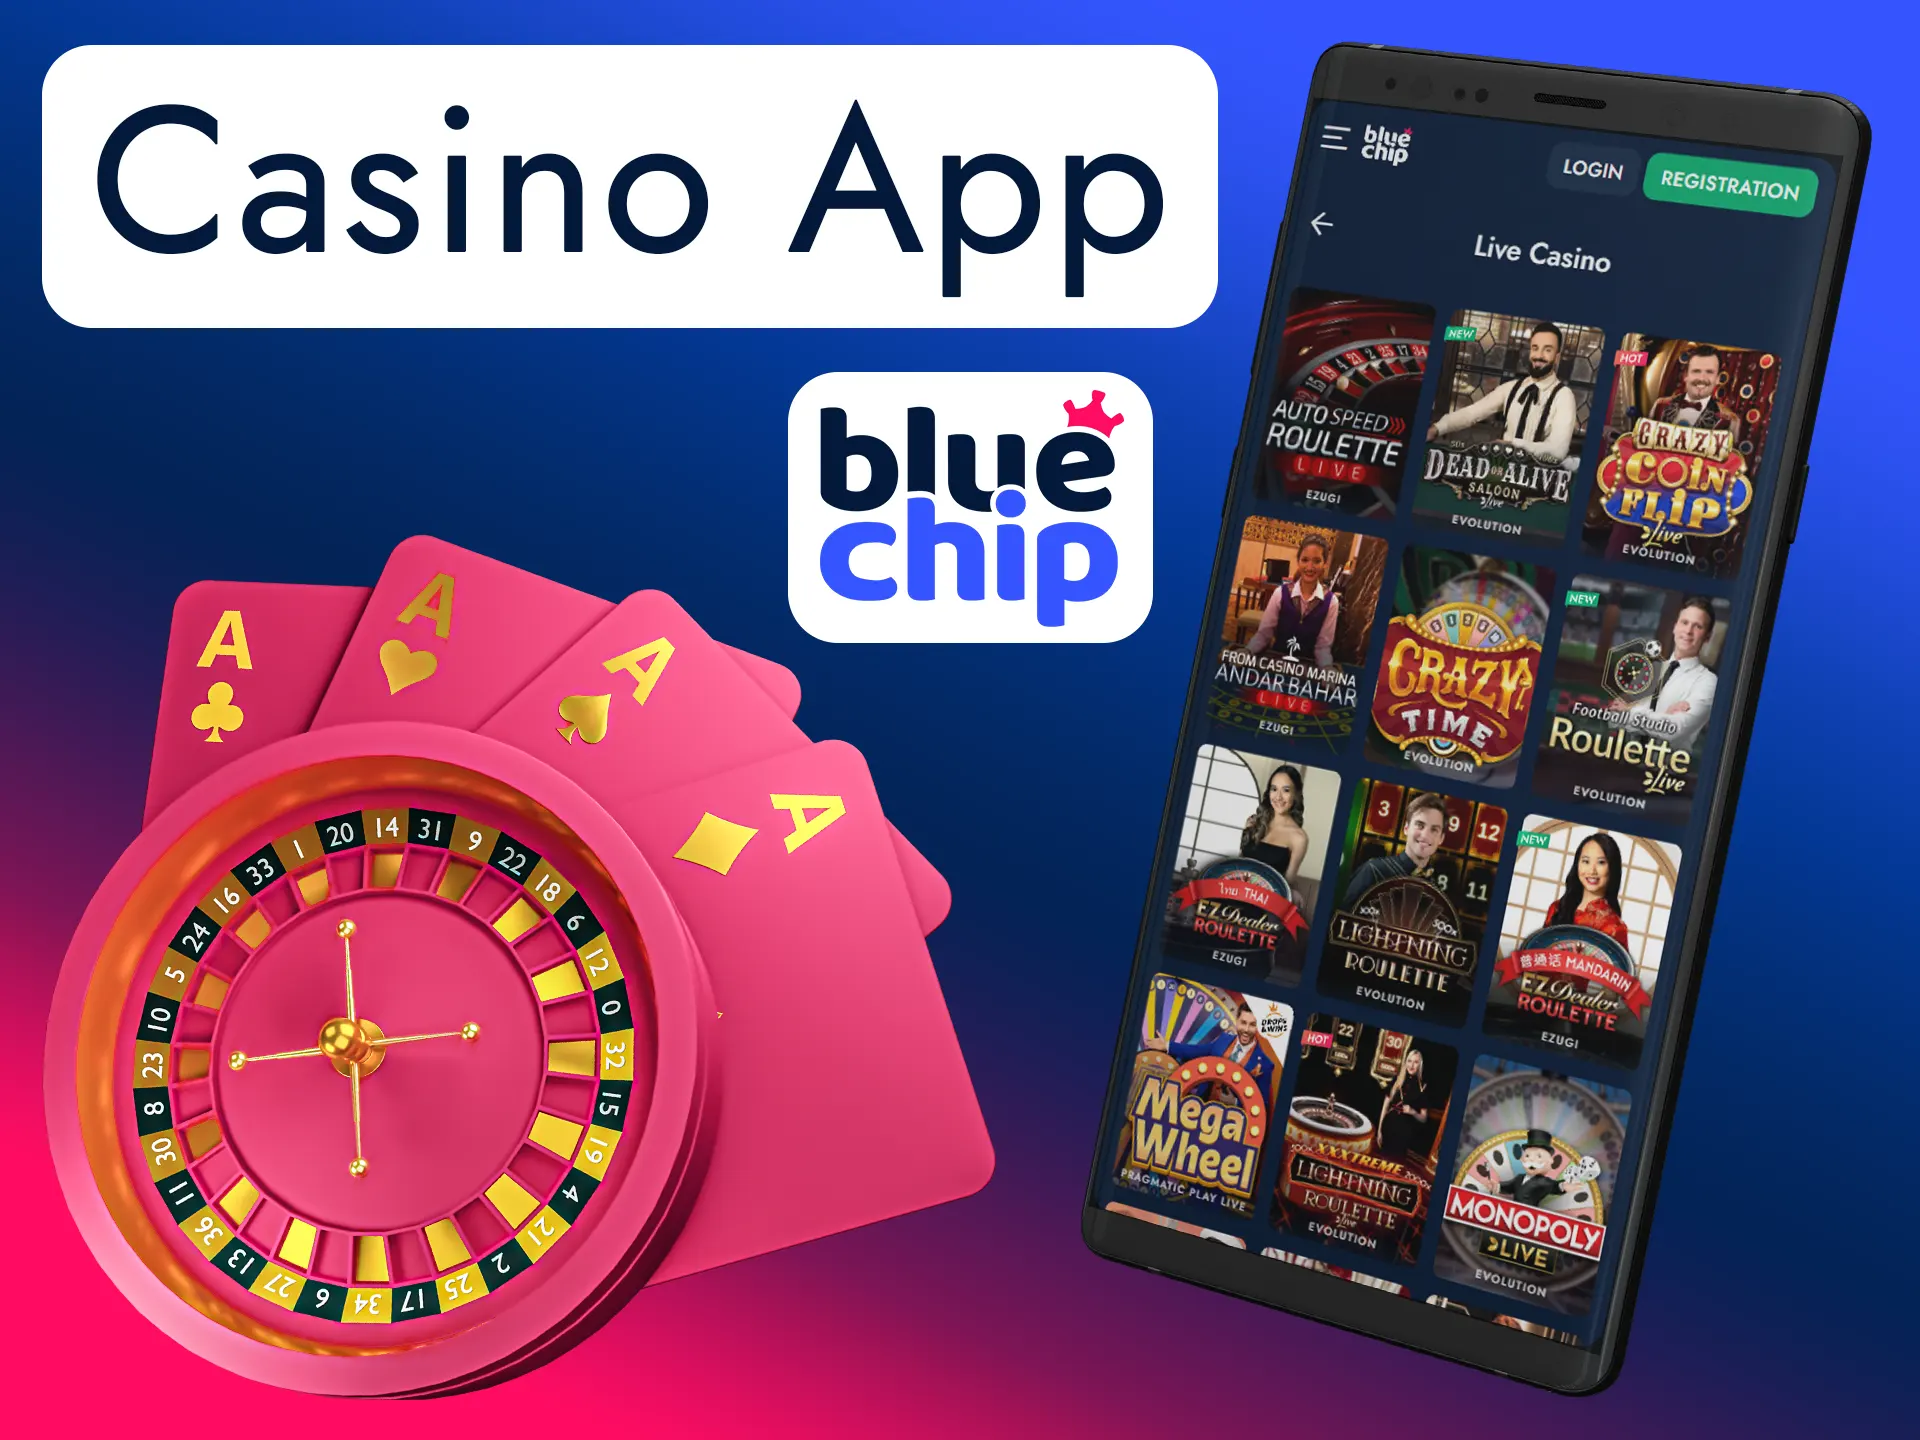 Play better and win more money with Bluechip casino app.